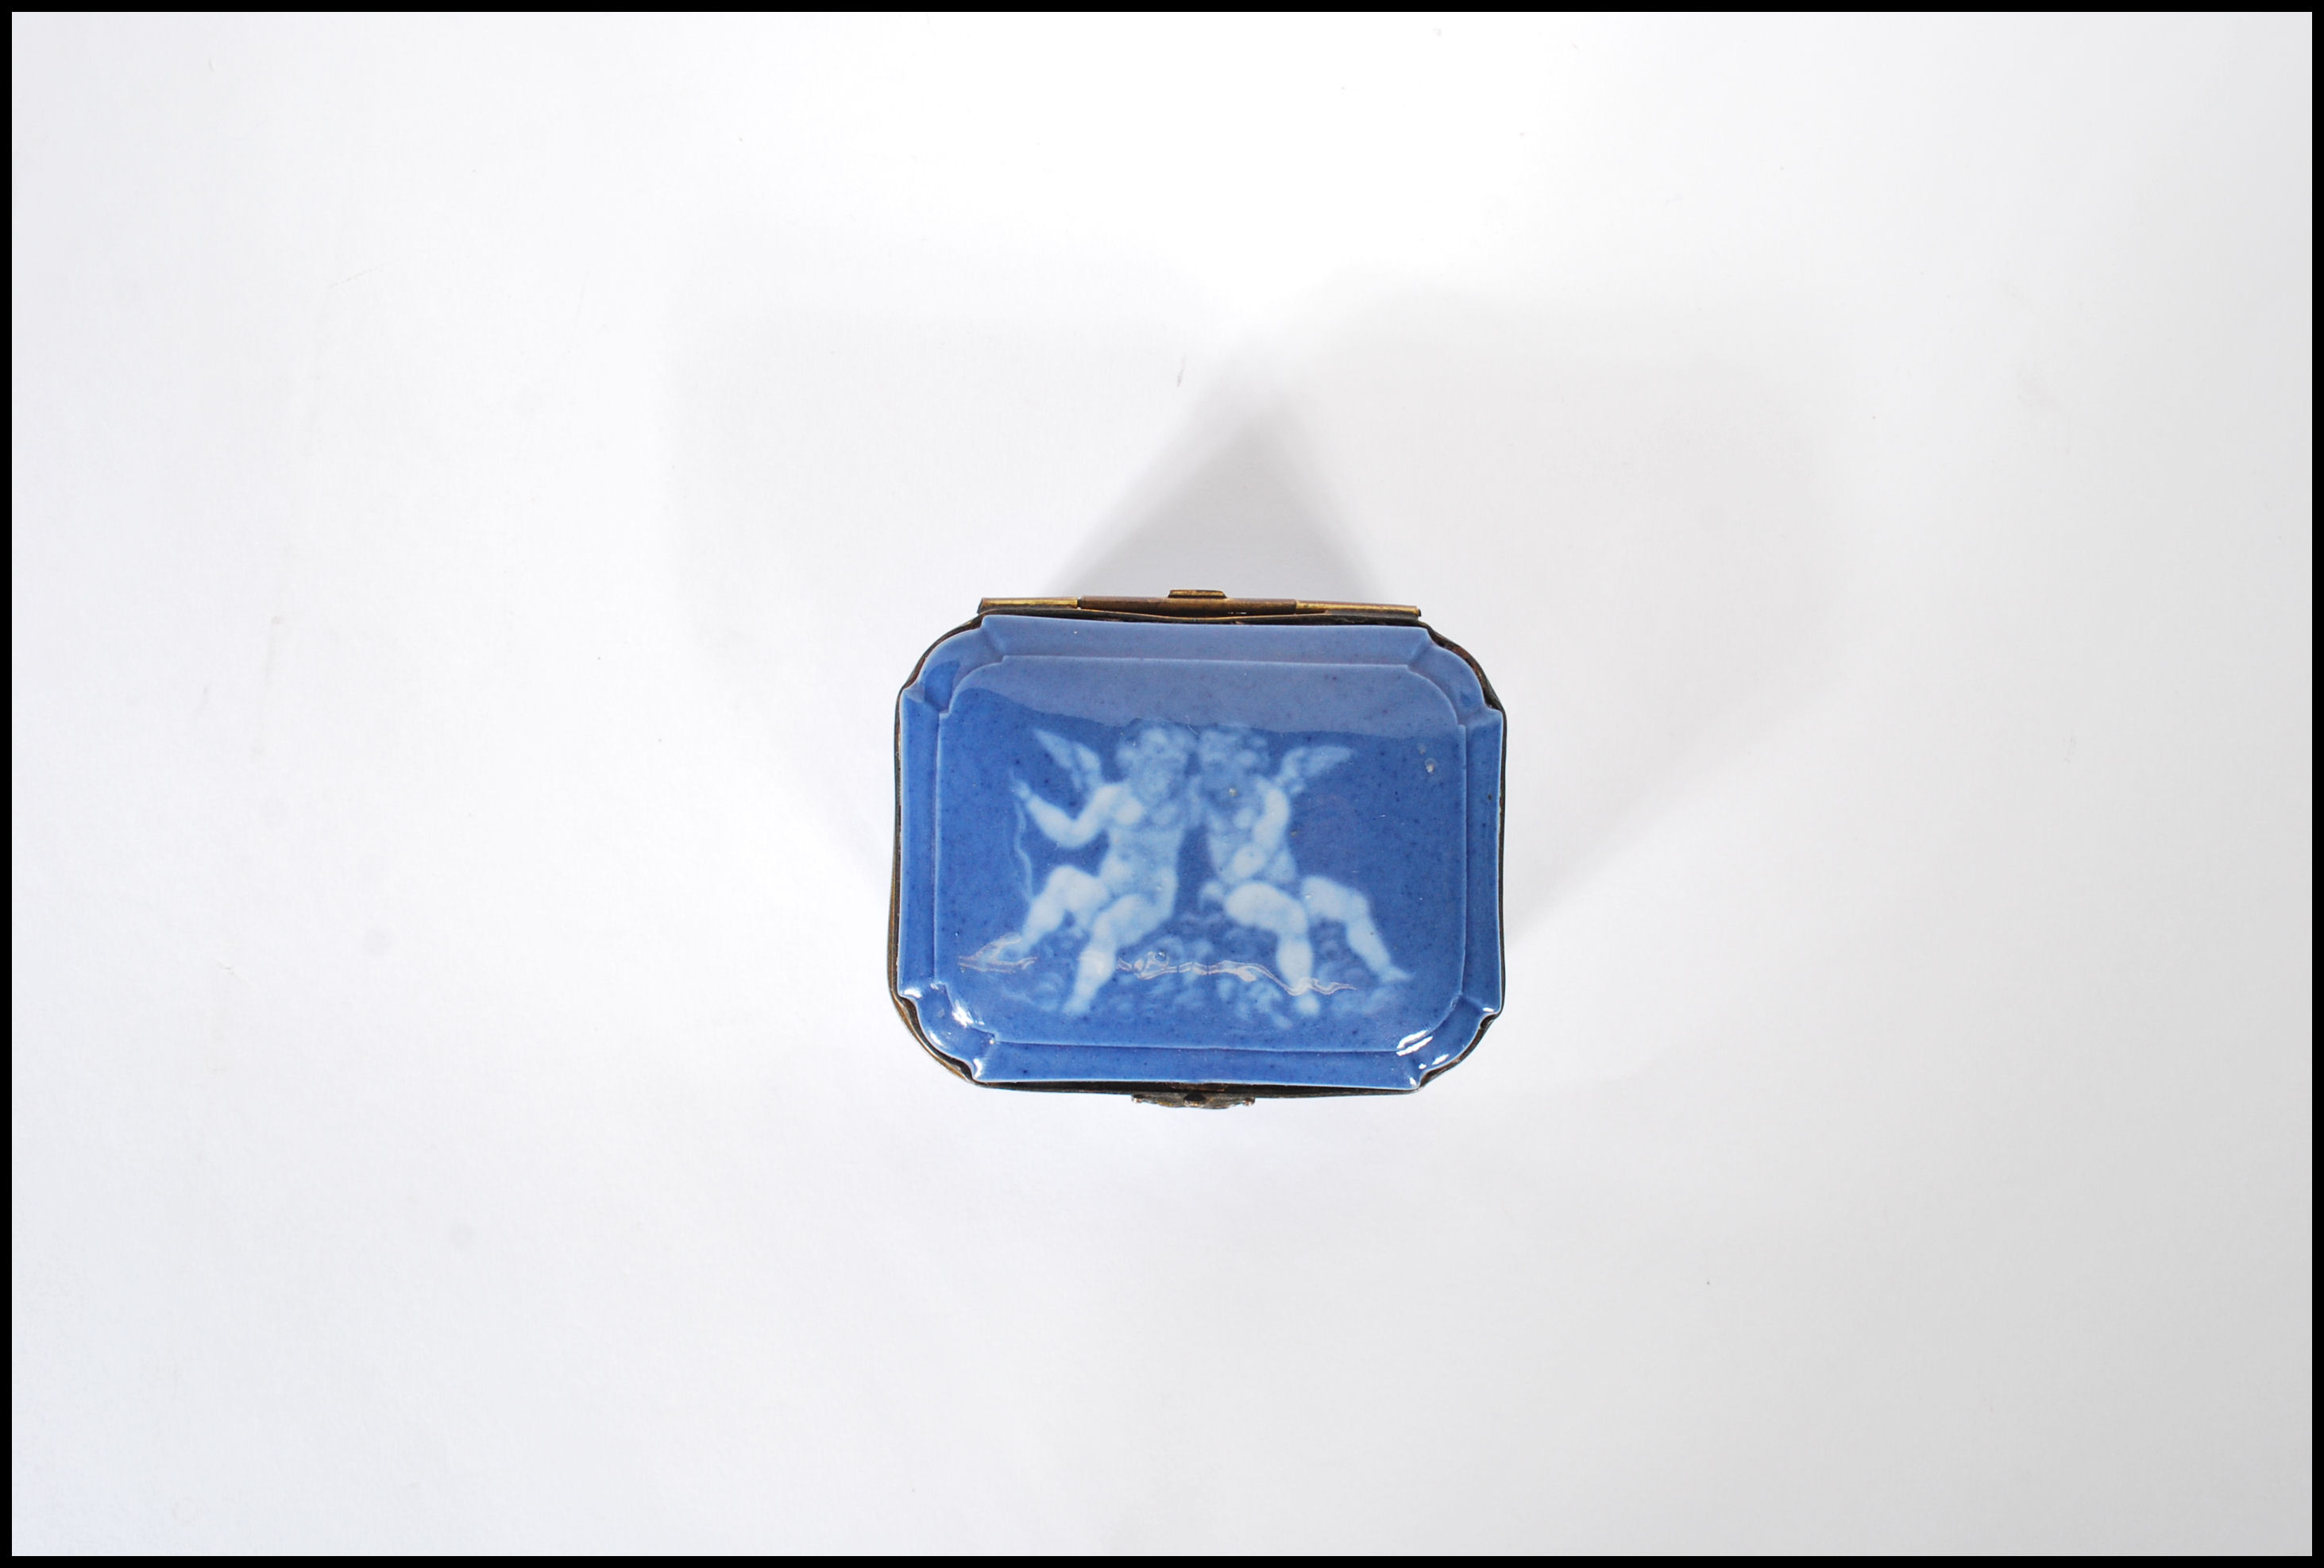 An early 20th Century continental German porcelain blue ceramic casket / trinket box with a pat - Image 7 of 9